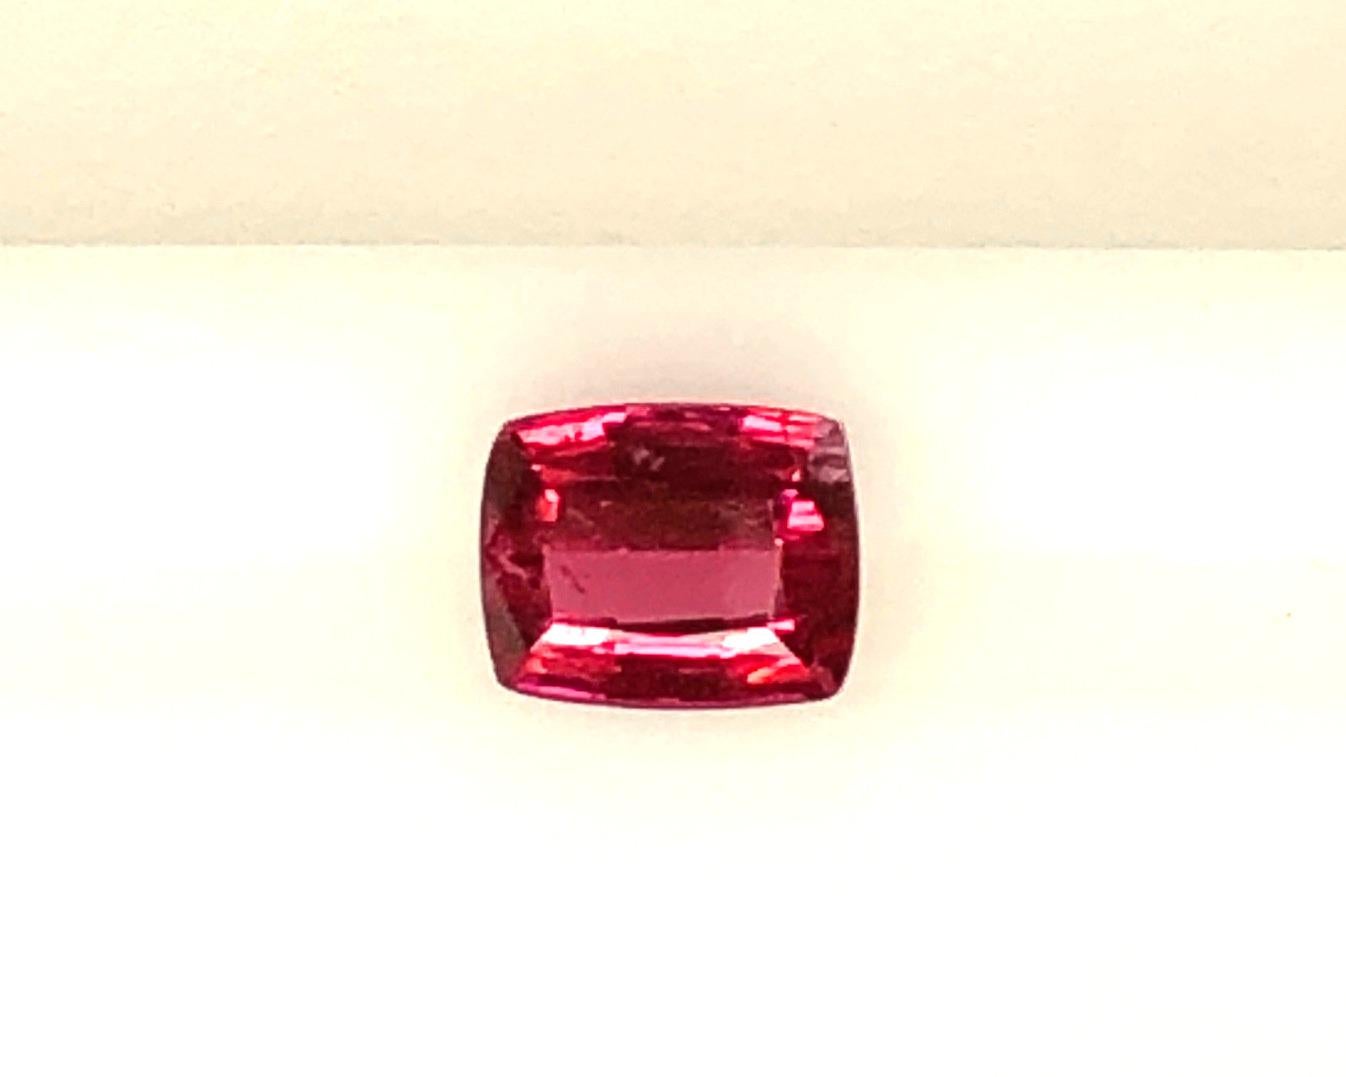 Privately Curated Collection of Unset Loose Fancy Spinel Gemstones, 89.77 Carats 6